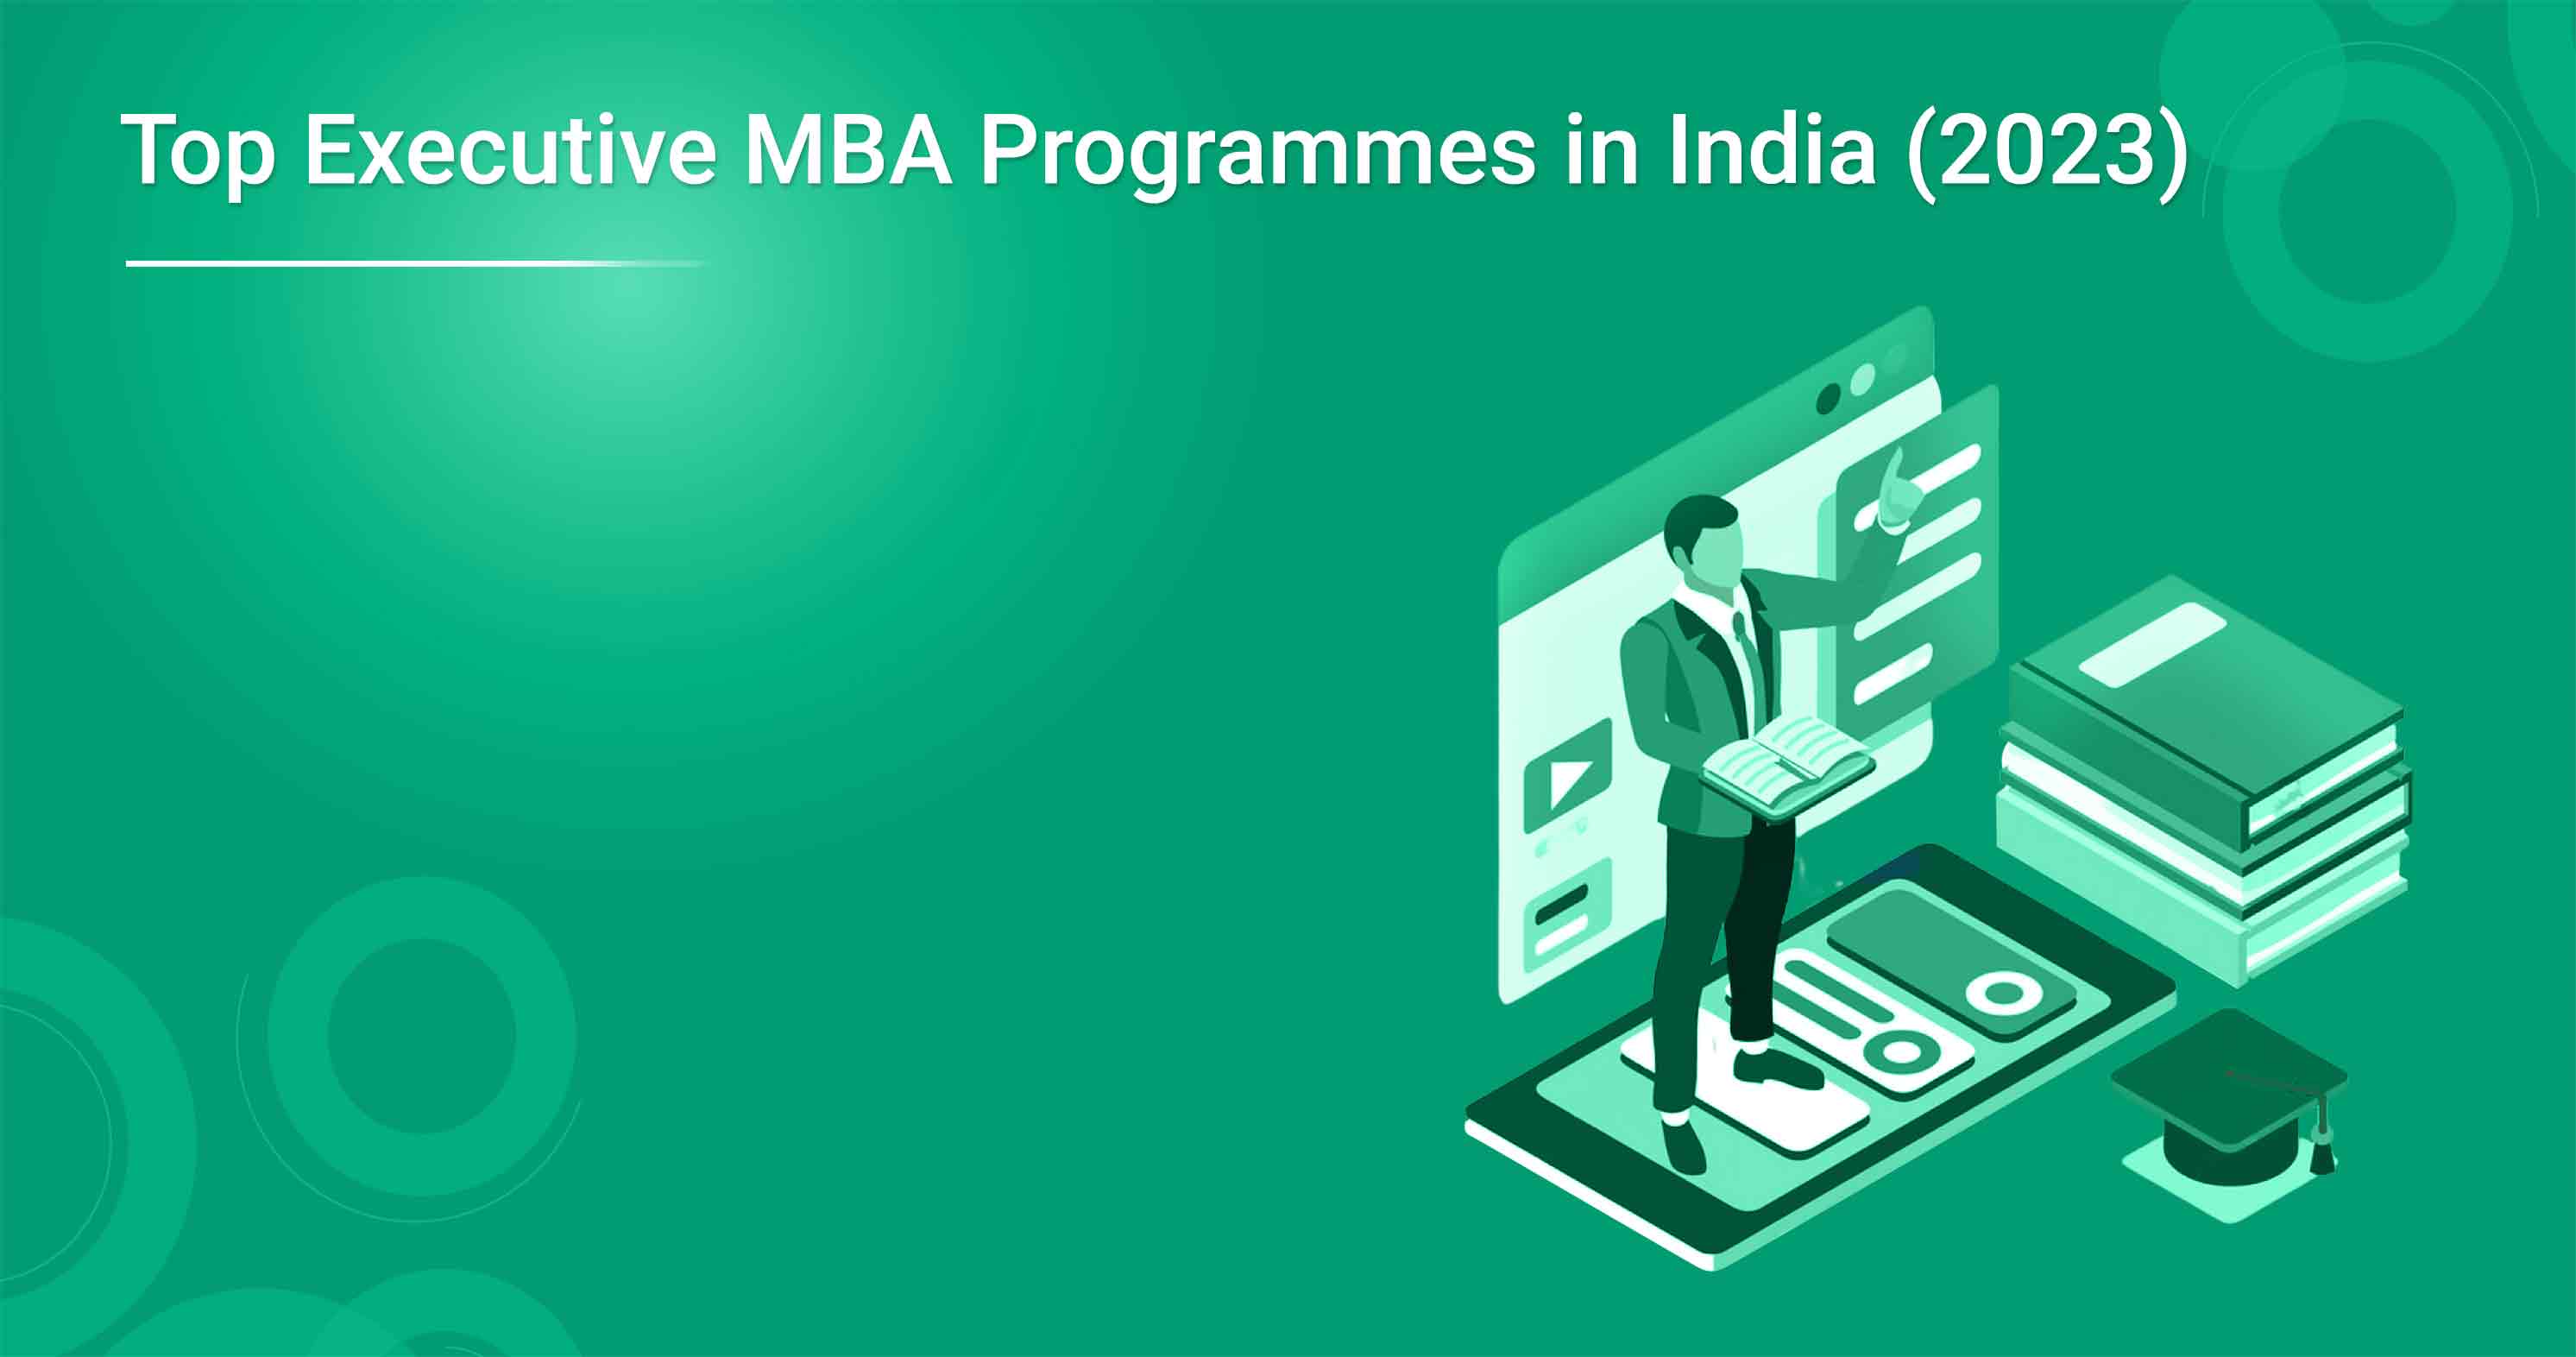 Top Executive MBA Programmes in India (2023)